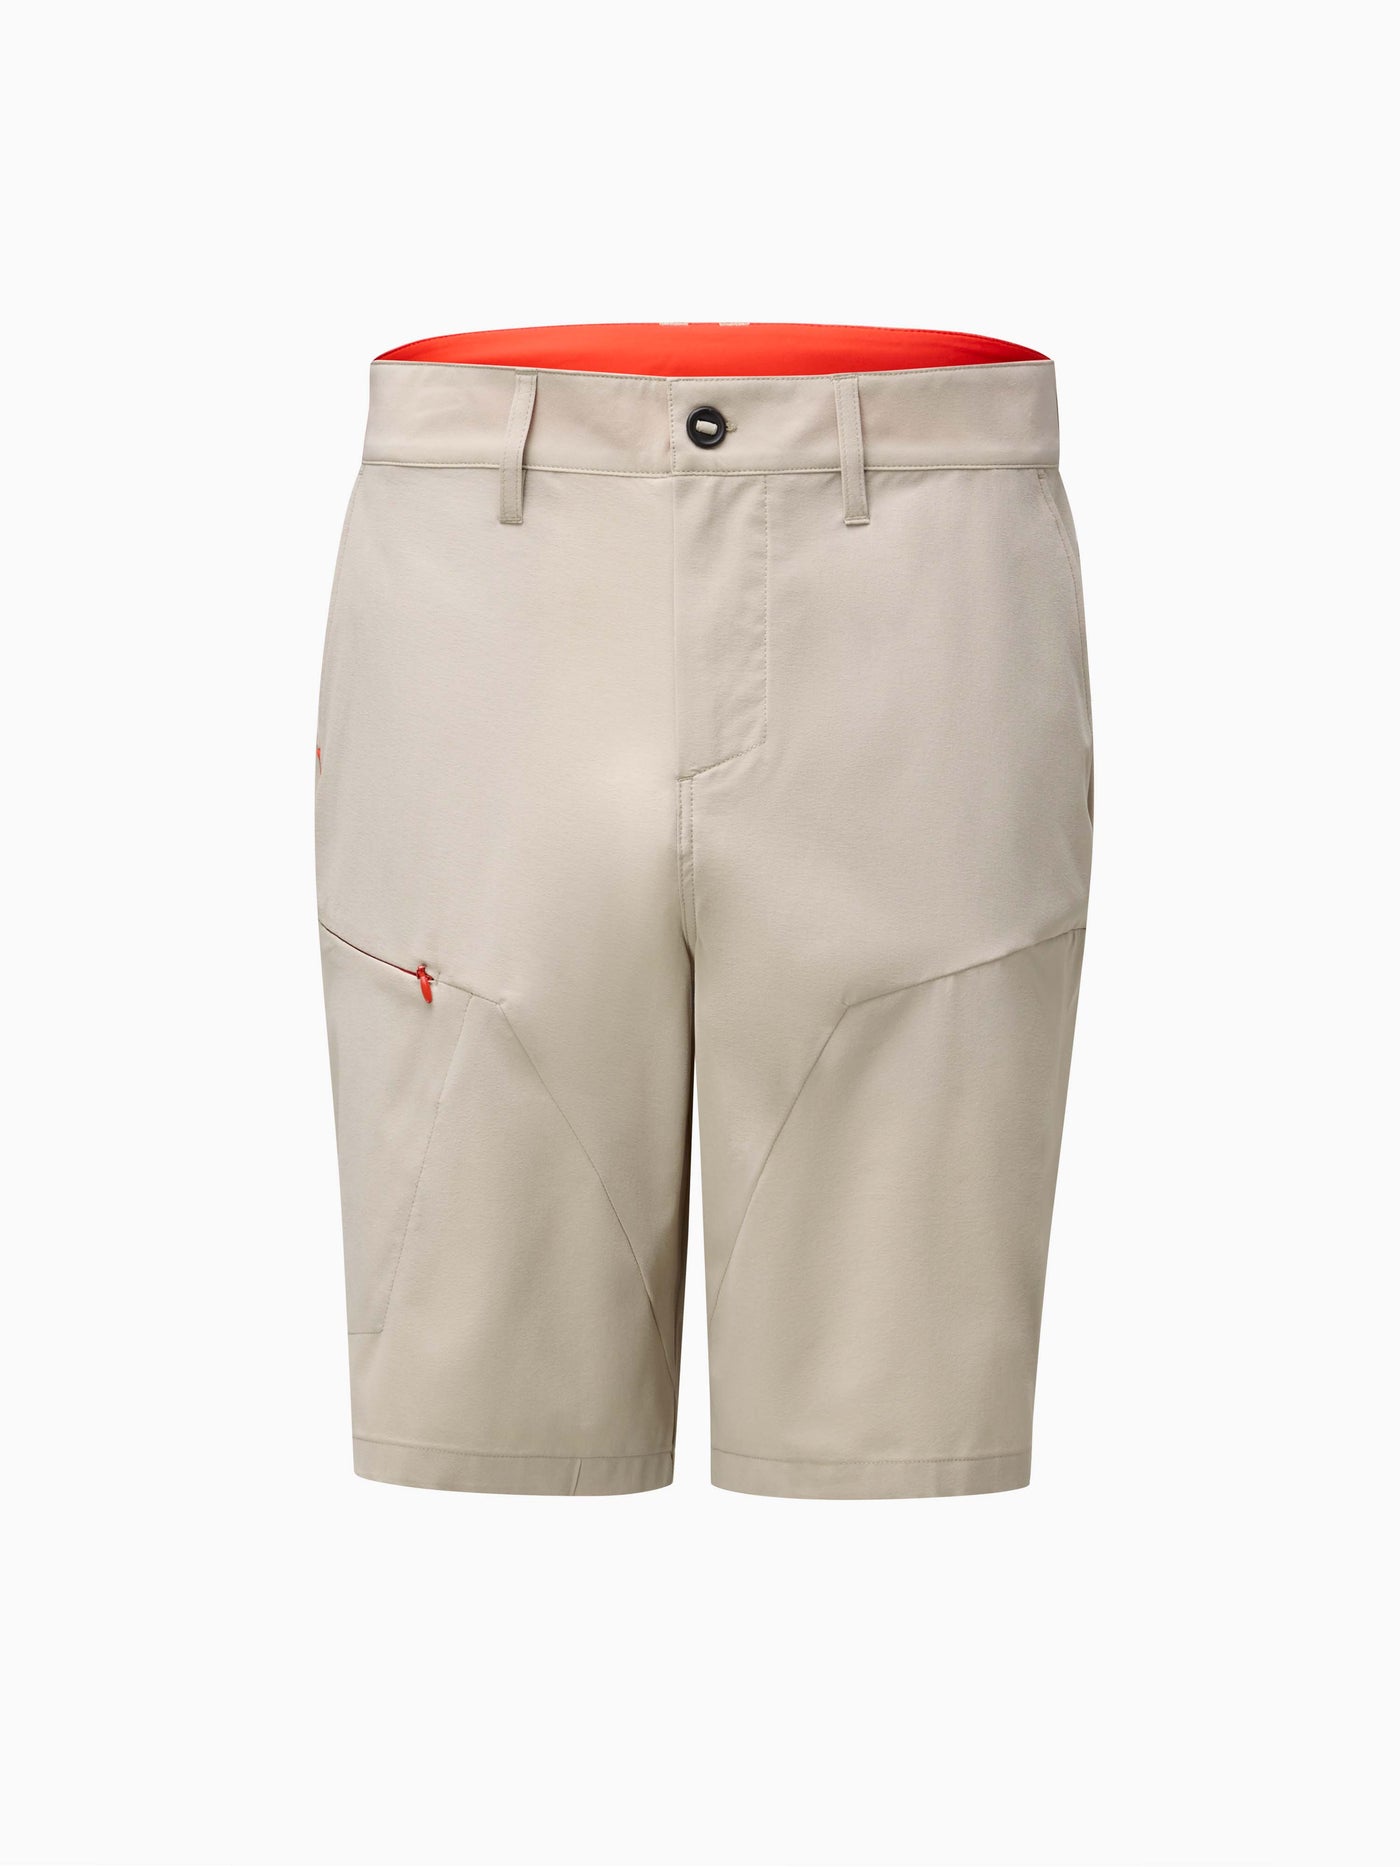 CHPT3 Mens Tech Shorts in Stone Colour Front View #color_stone